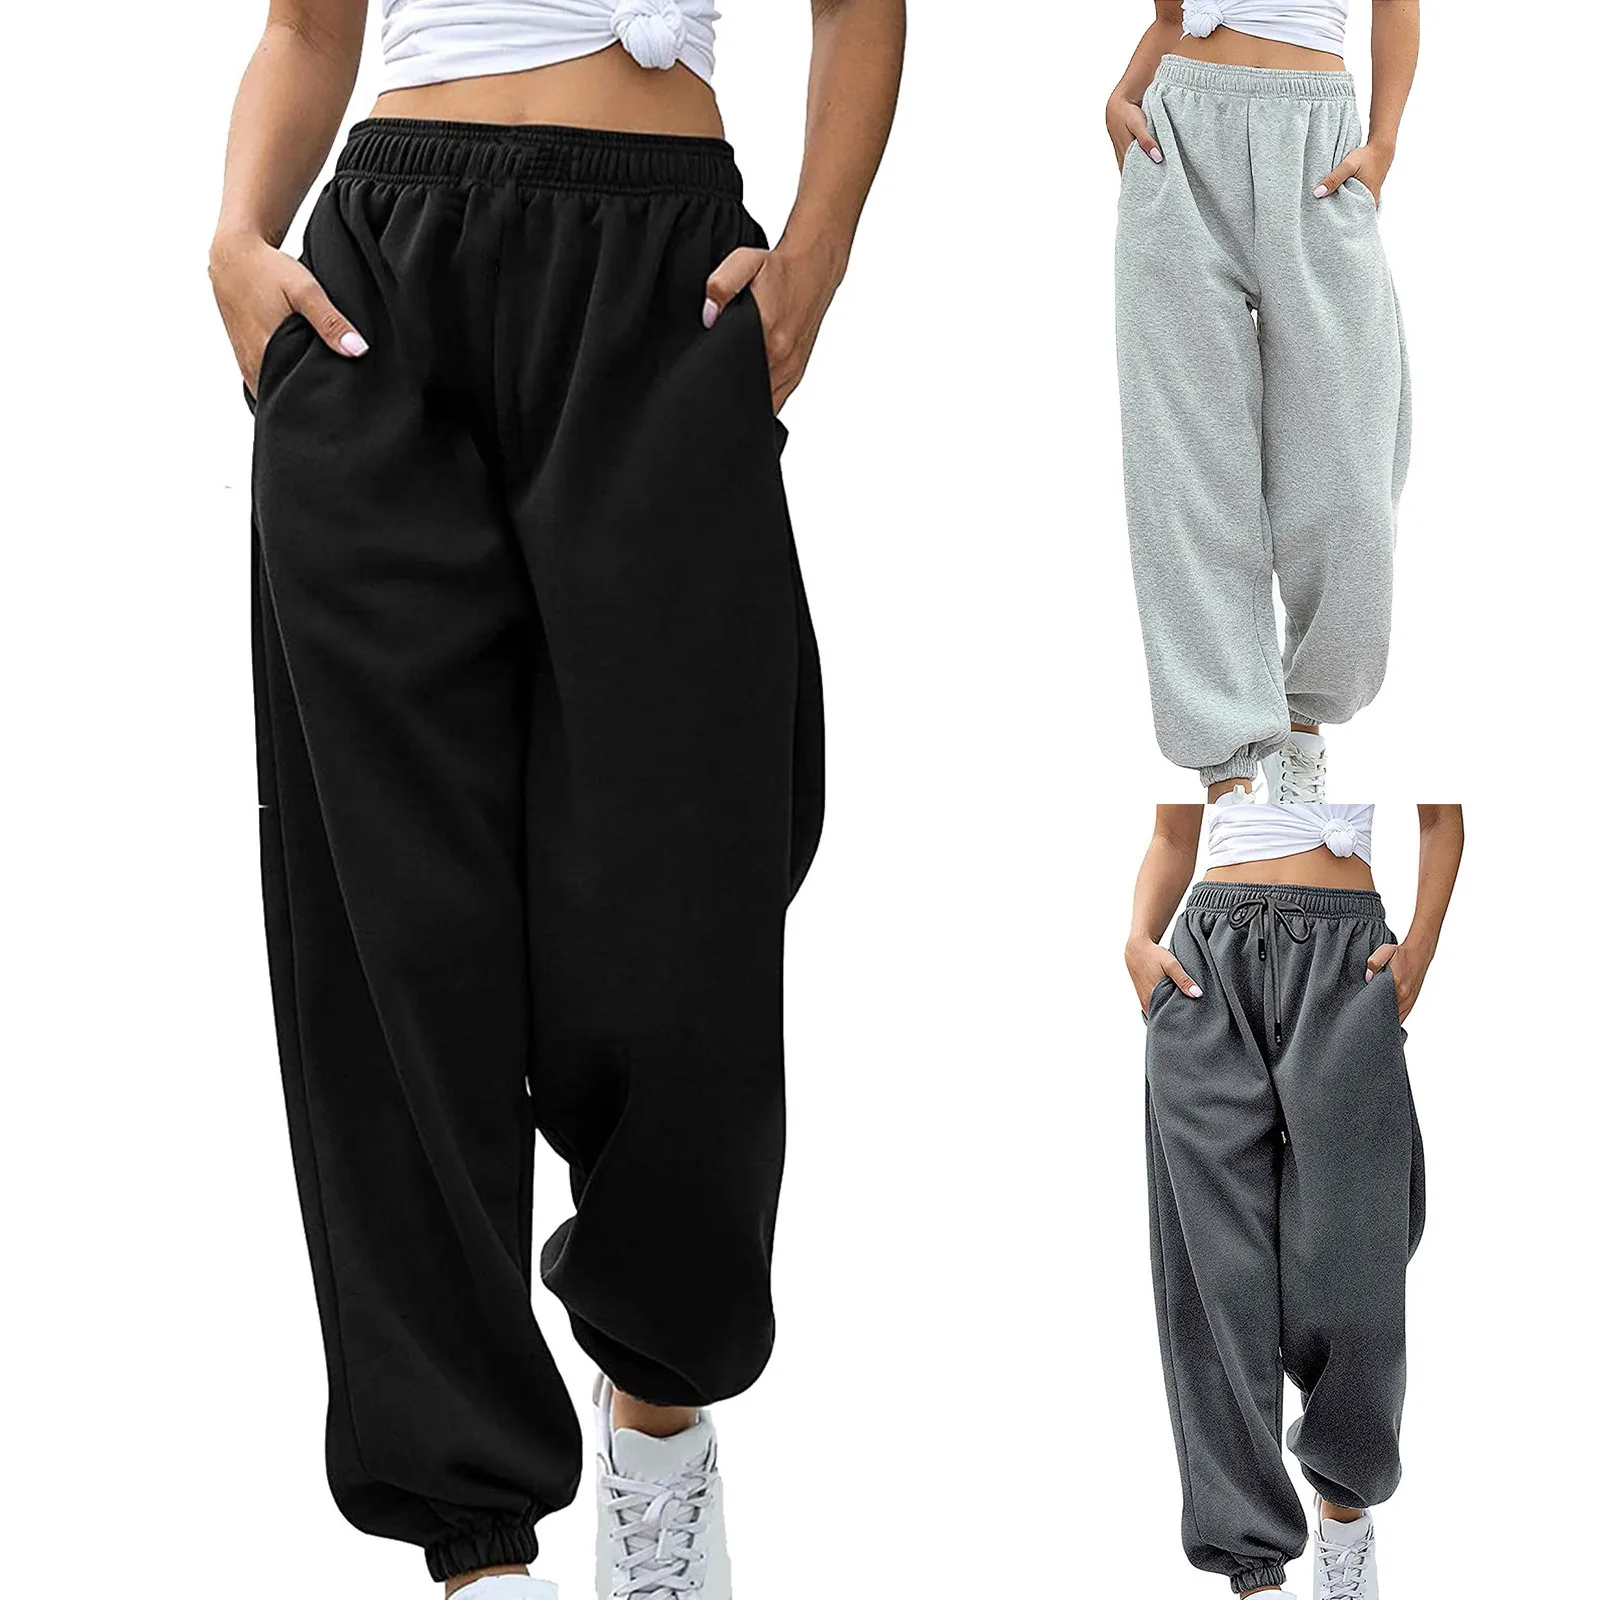 

Women Sweatpants Drawstrings Running Sport Joggers Trousers Cotton Loose Elastic Waist With Pockets Athletic Gym Fitness Joggers